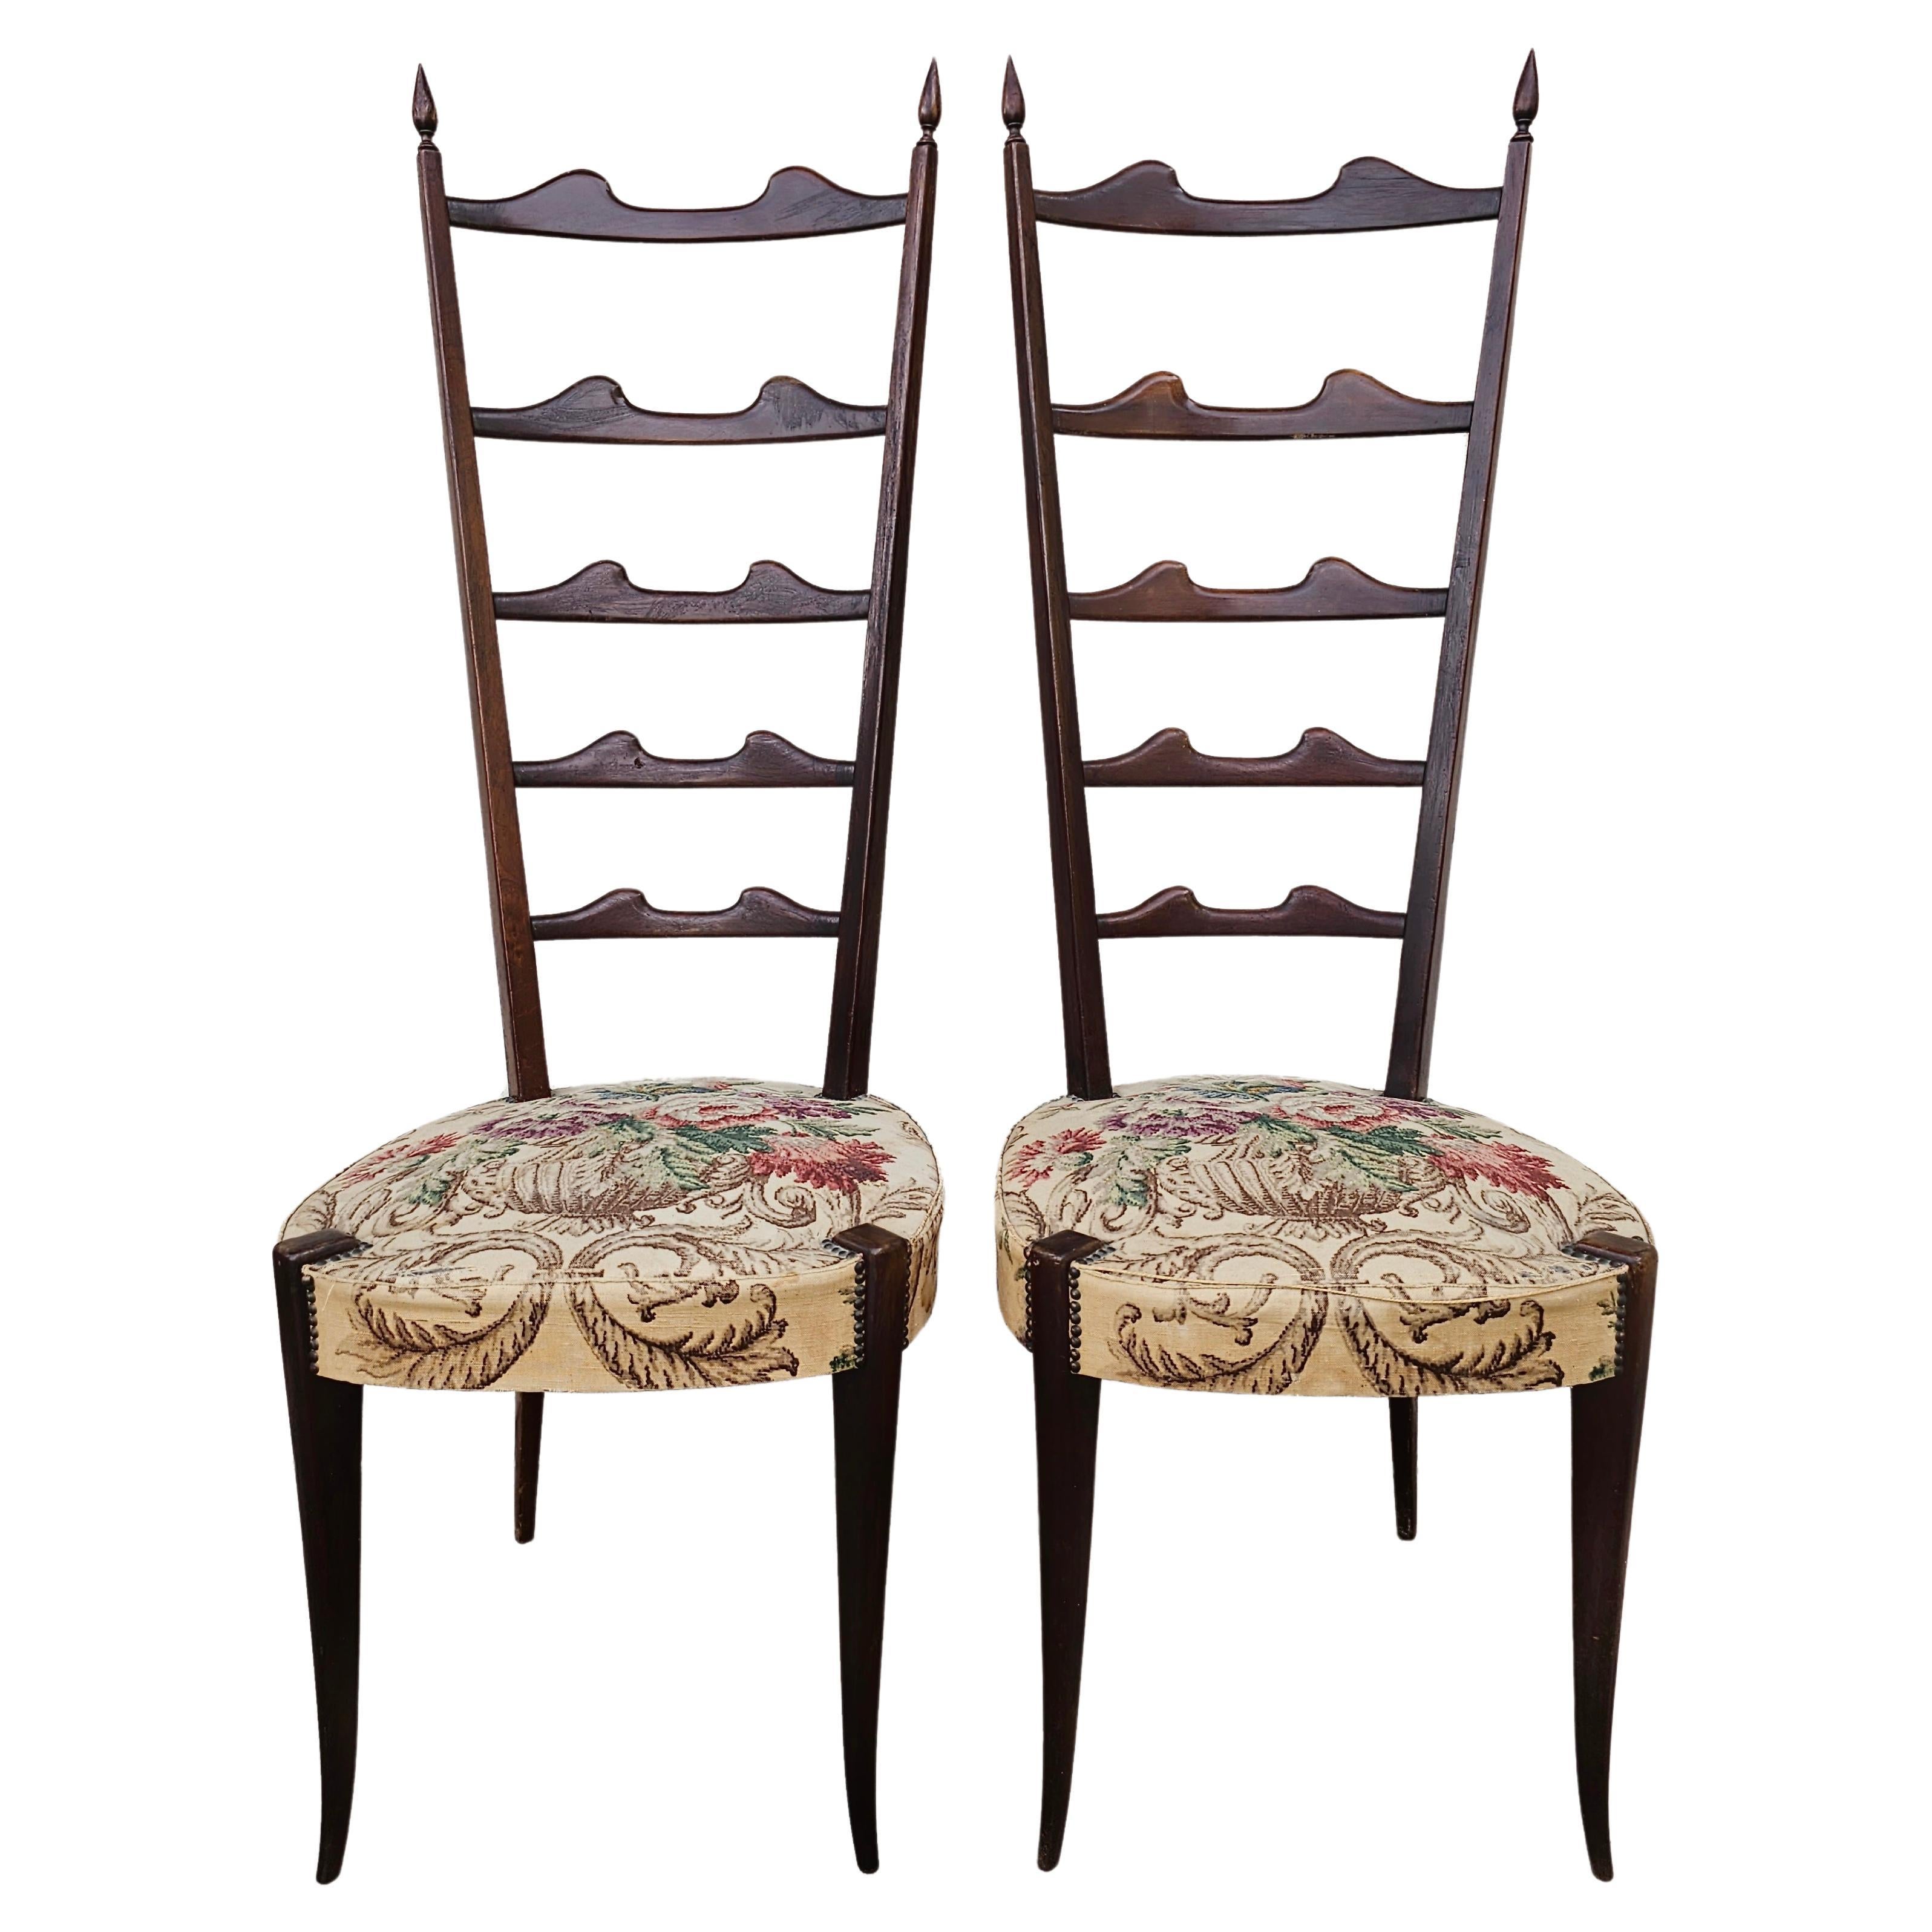 High Backrest Chiavari Chairs done in Mahogany by Paolo Buffa Pair, Italy 1950s For Sale